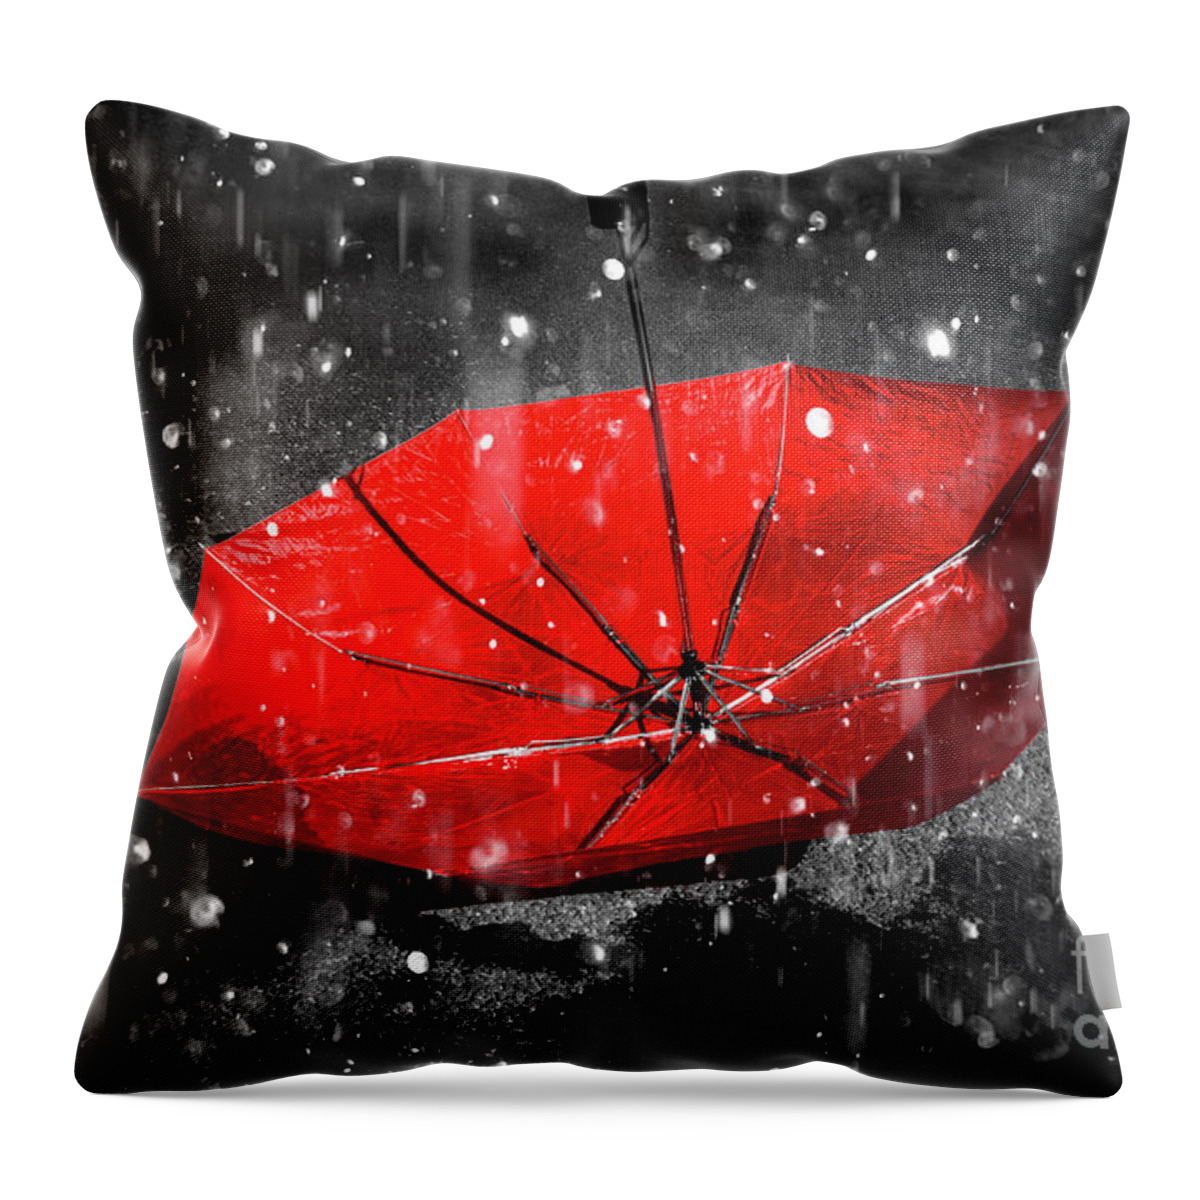 Red Throw Pillow featuring the photograph Epiphany by Jorgo Photography